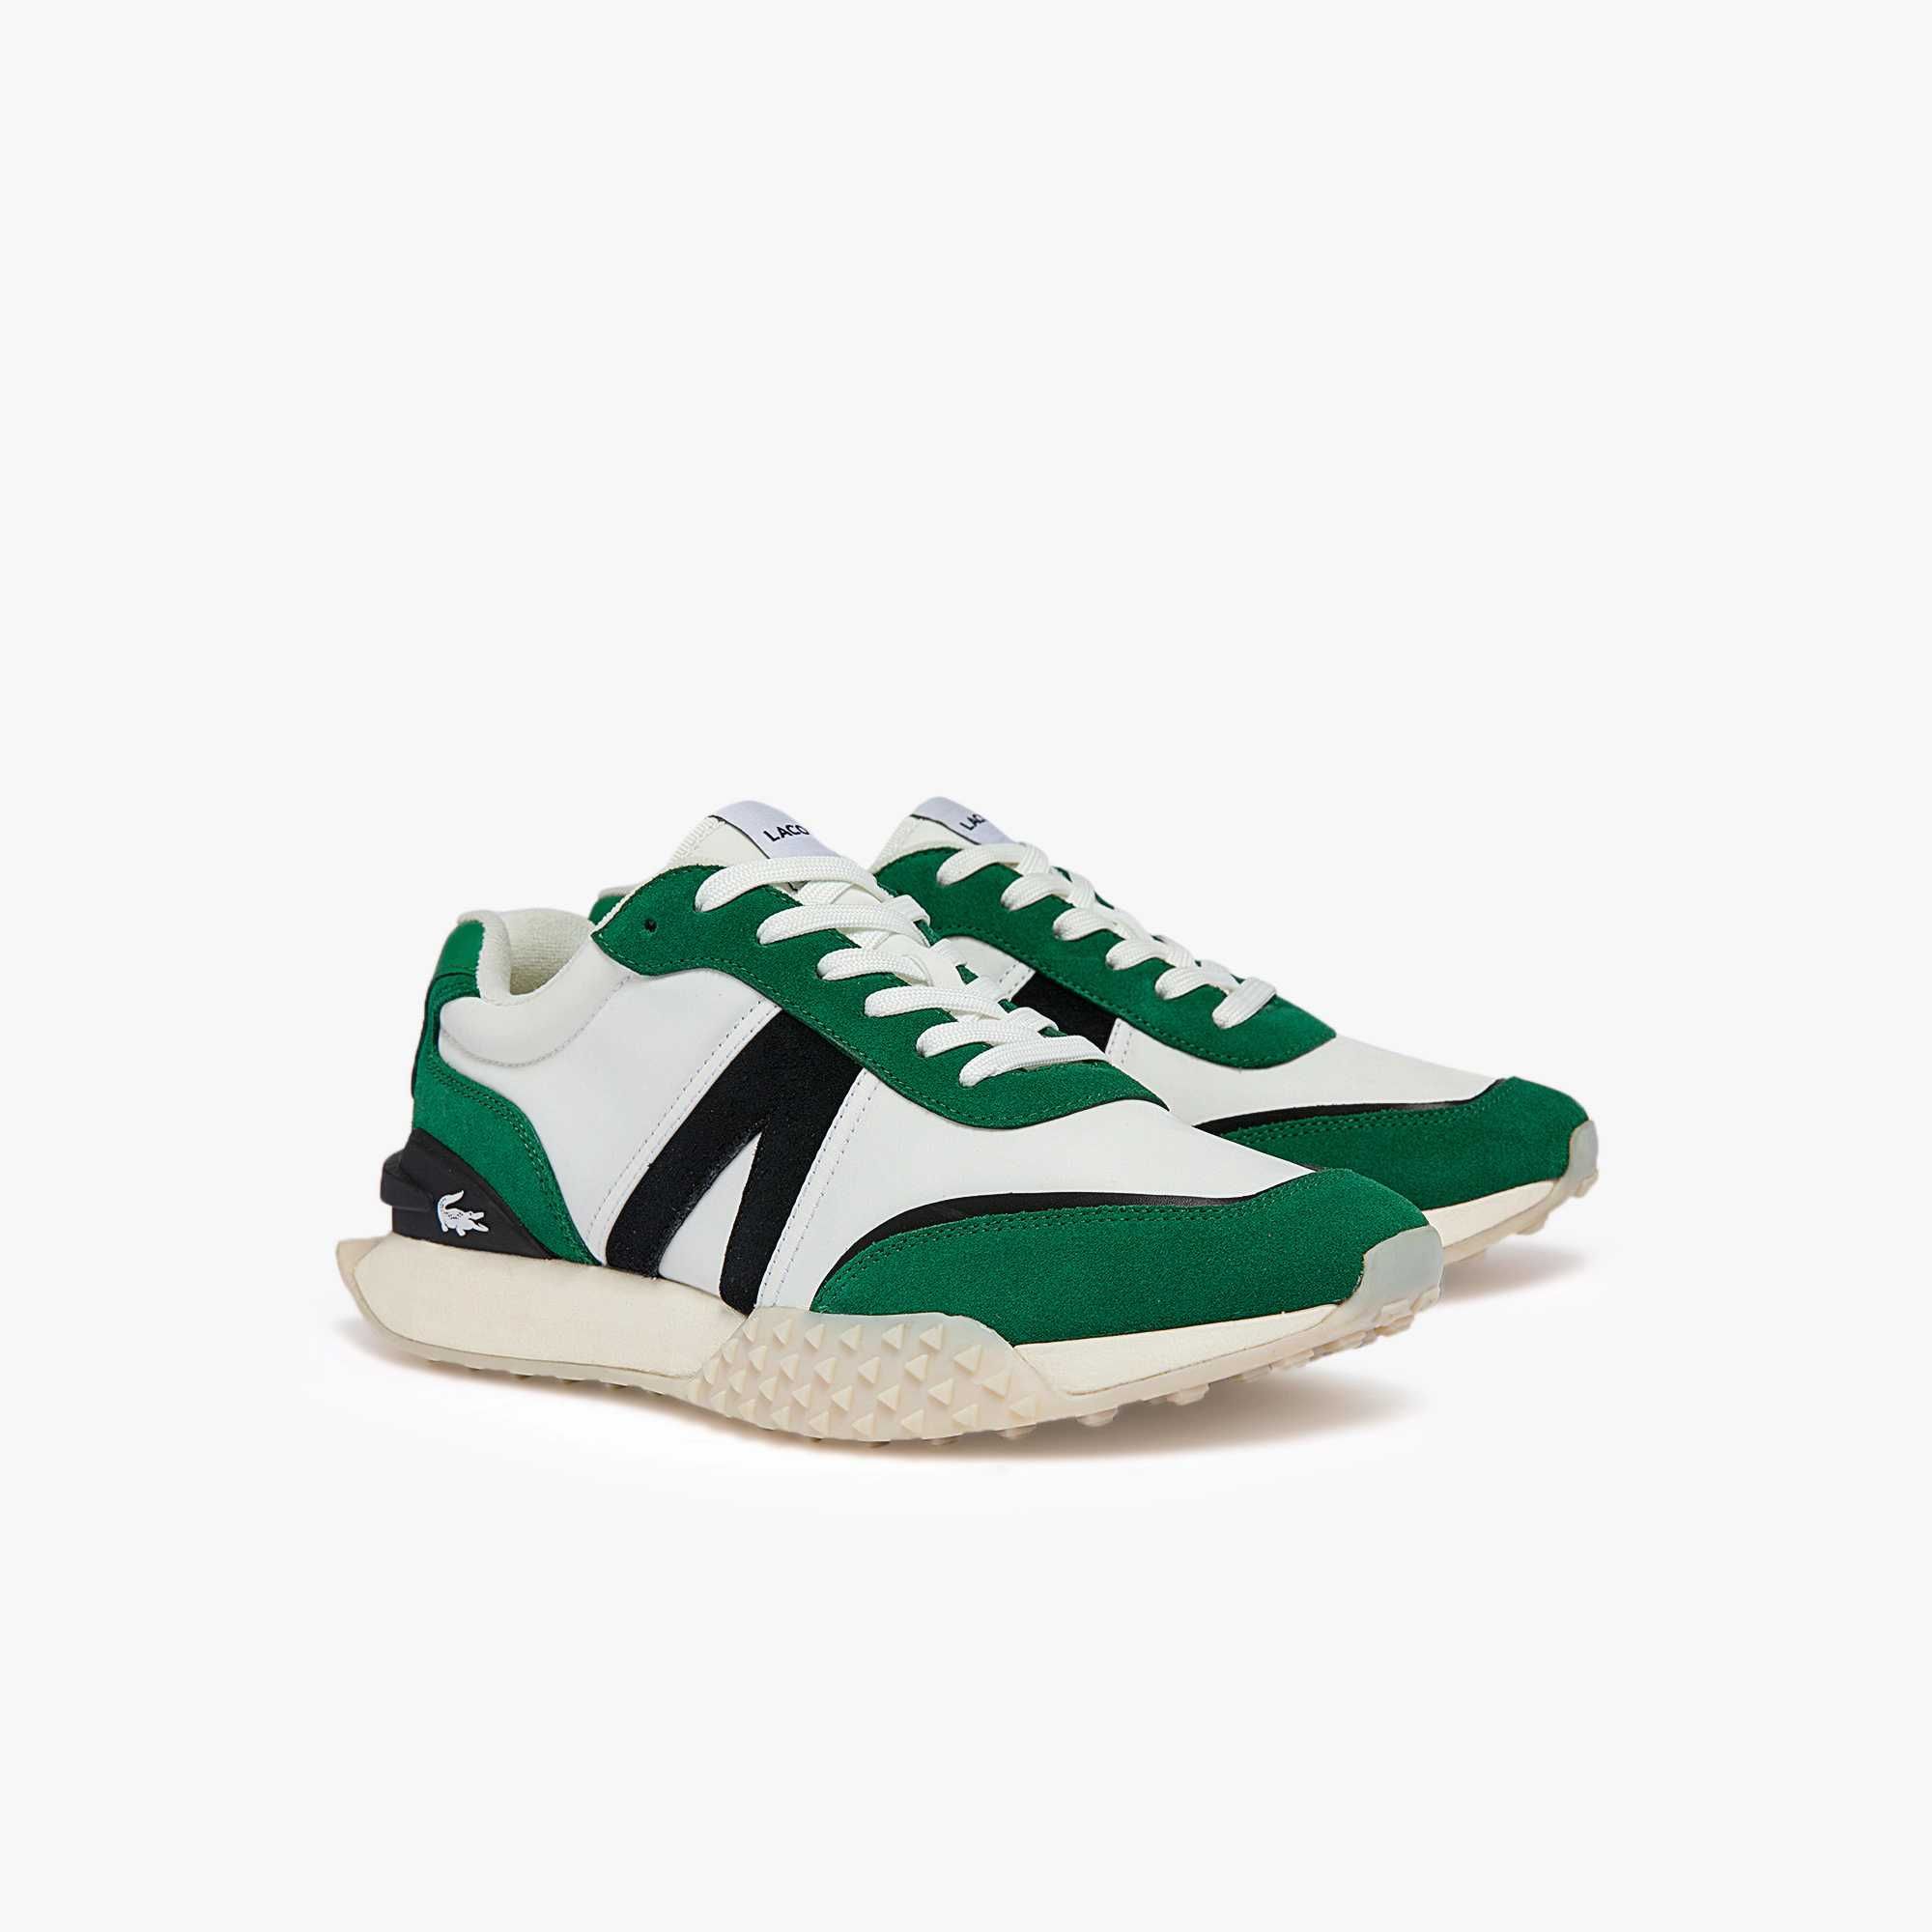 Lacoste men's l-spin deluxe accent sneakers